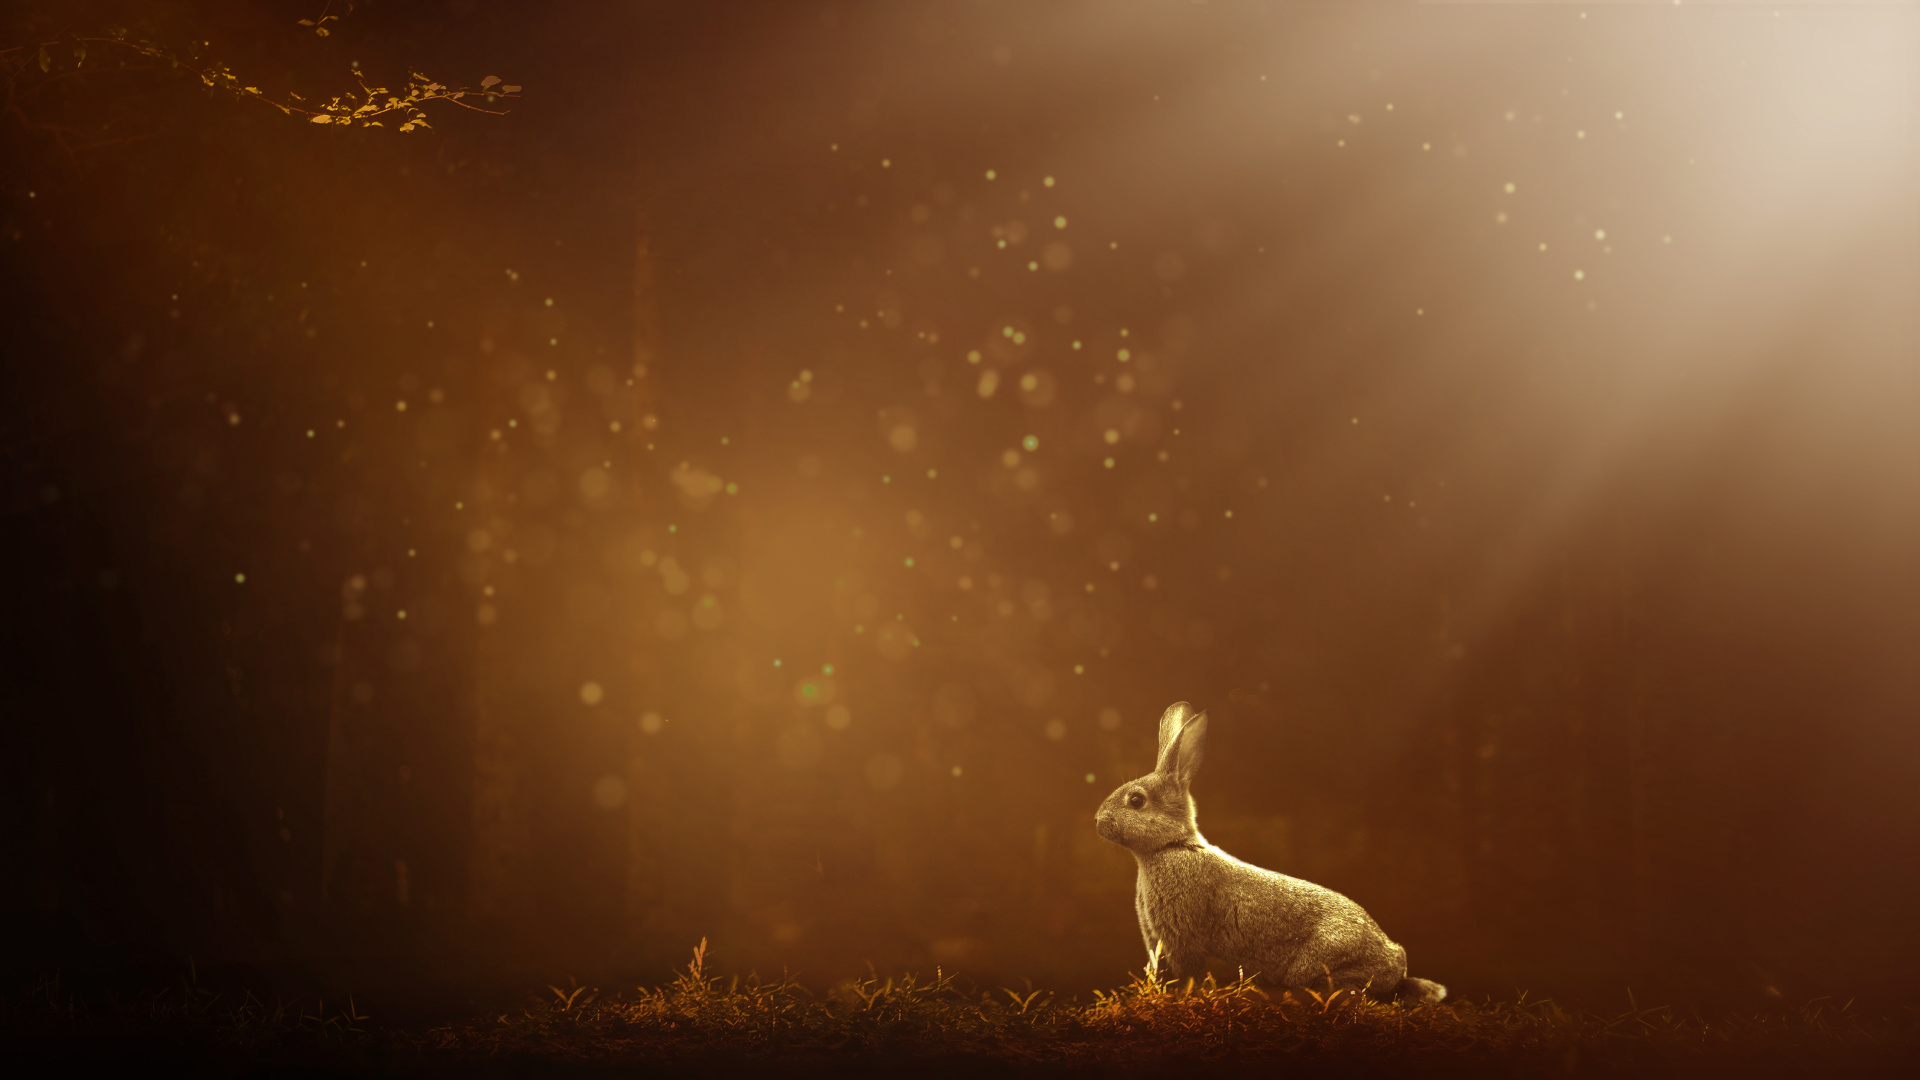 White Rabbit on Brown Grass Field During Night Time. Wallpaper in 1920x1080 Resolution